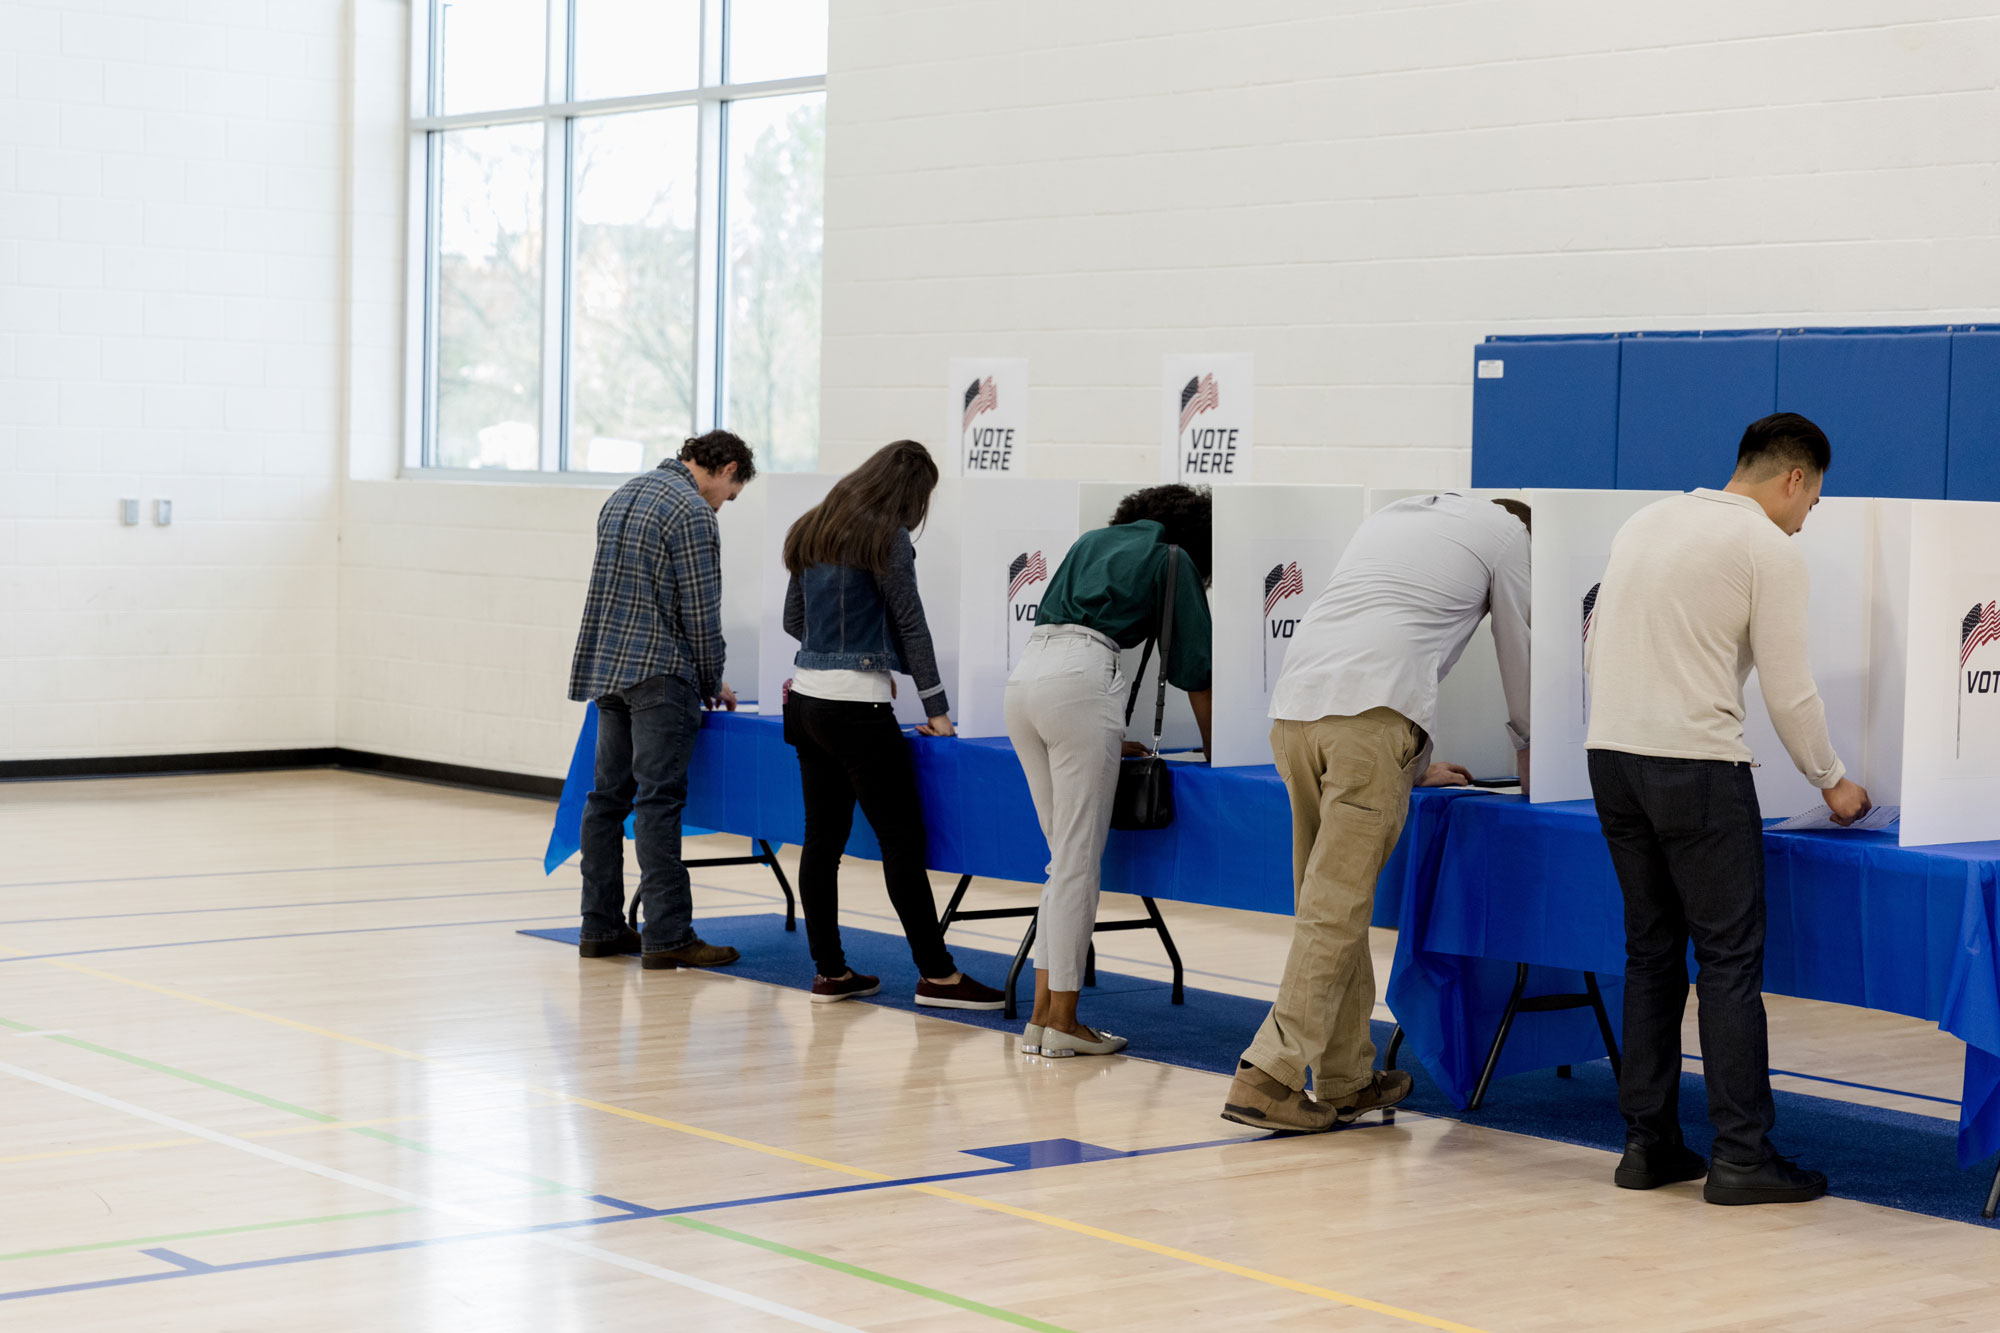 photo - People Stand at Voting Booths Along Gym Wall